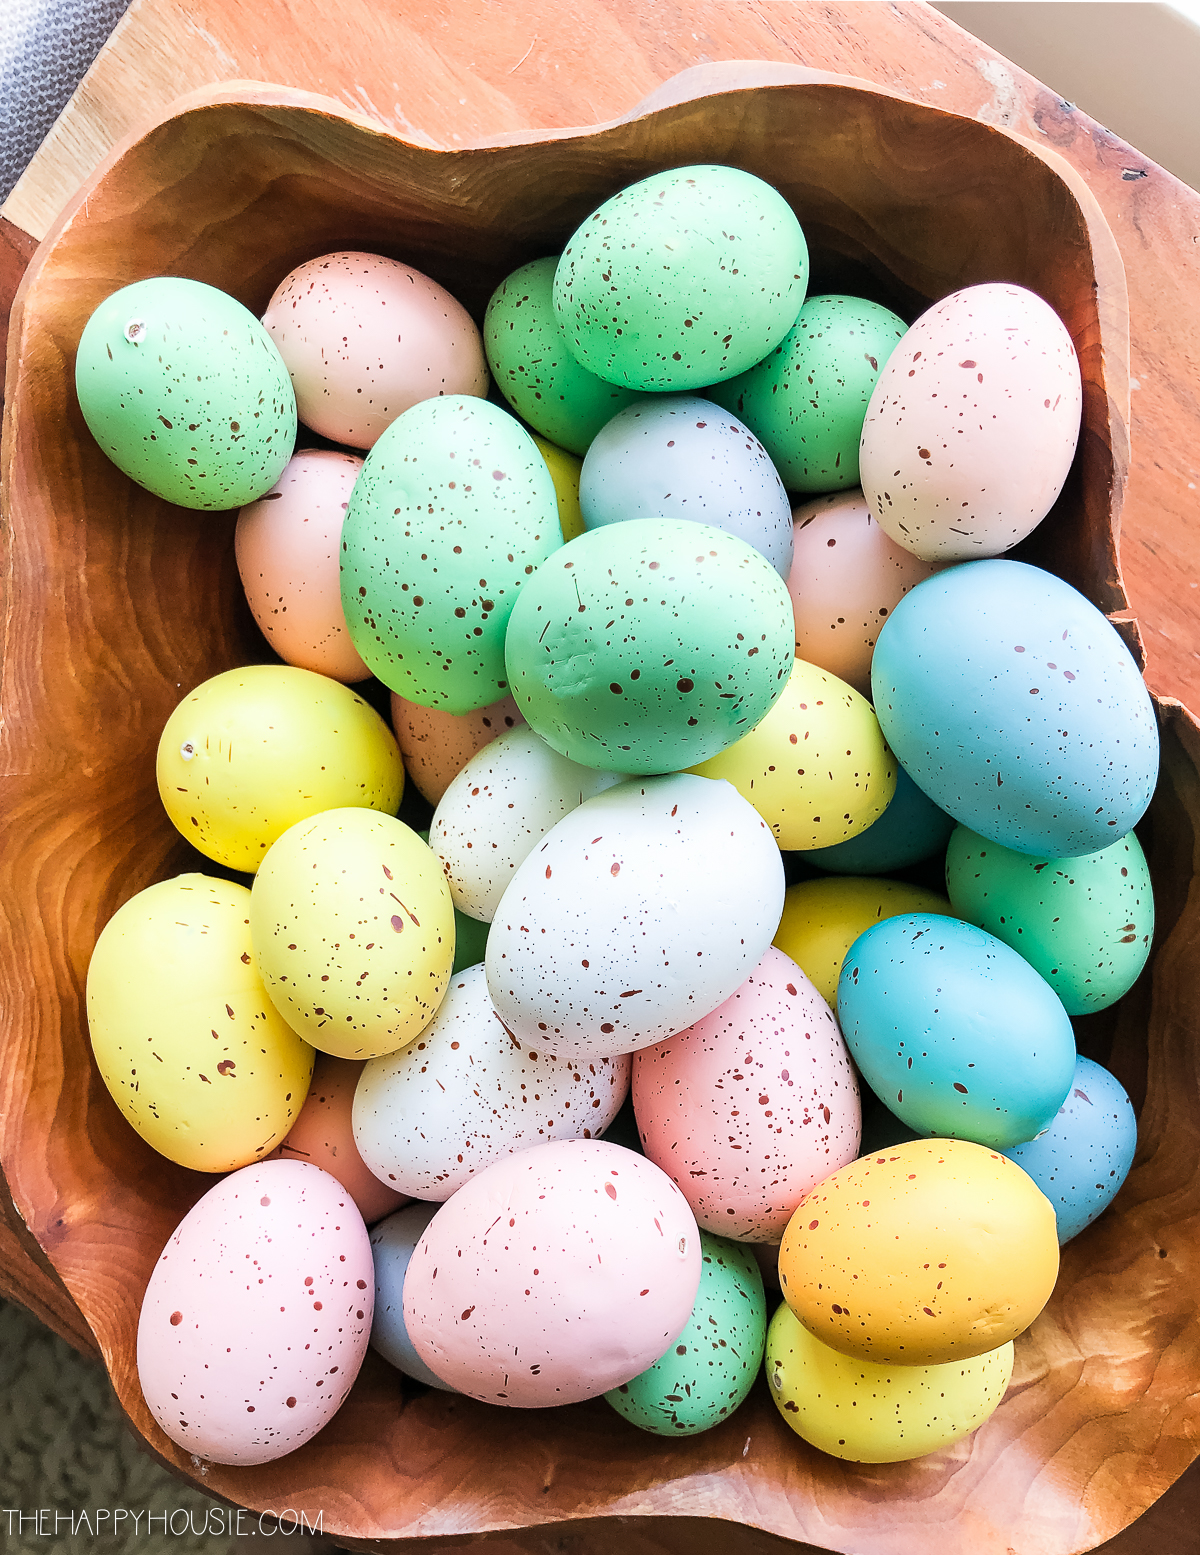 Pink, green and yellow Easter eggs.